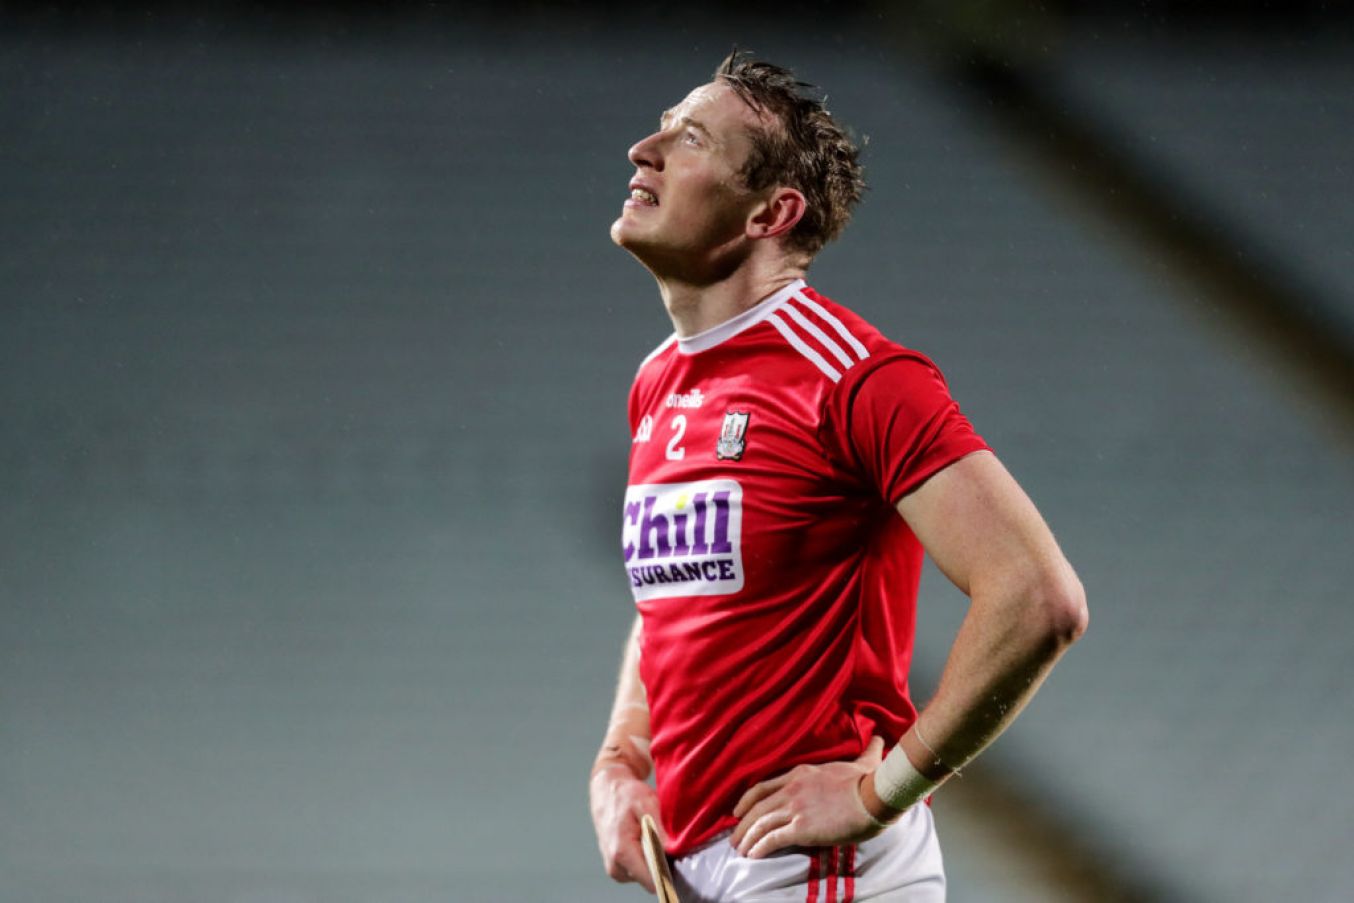 A Dejected Damien Cahalane Following Their Loss To Tipperary. Credit ©Inpho/Laszlo Geczo